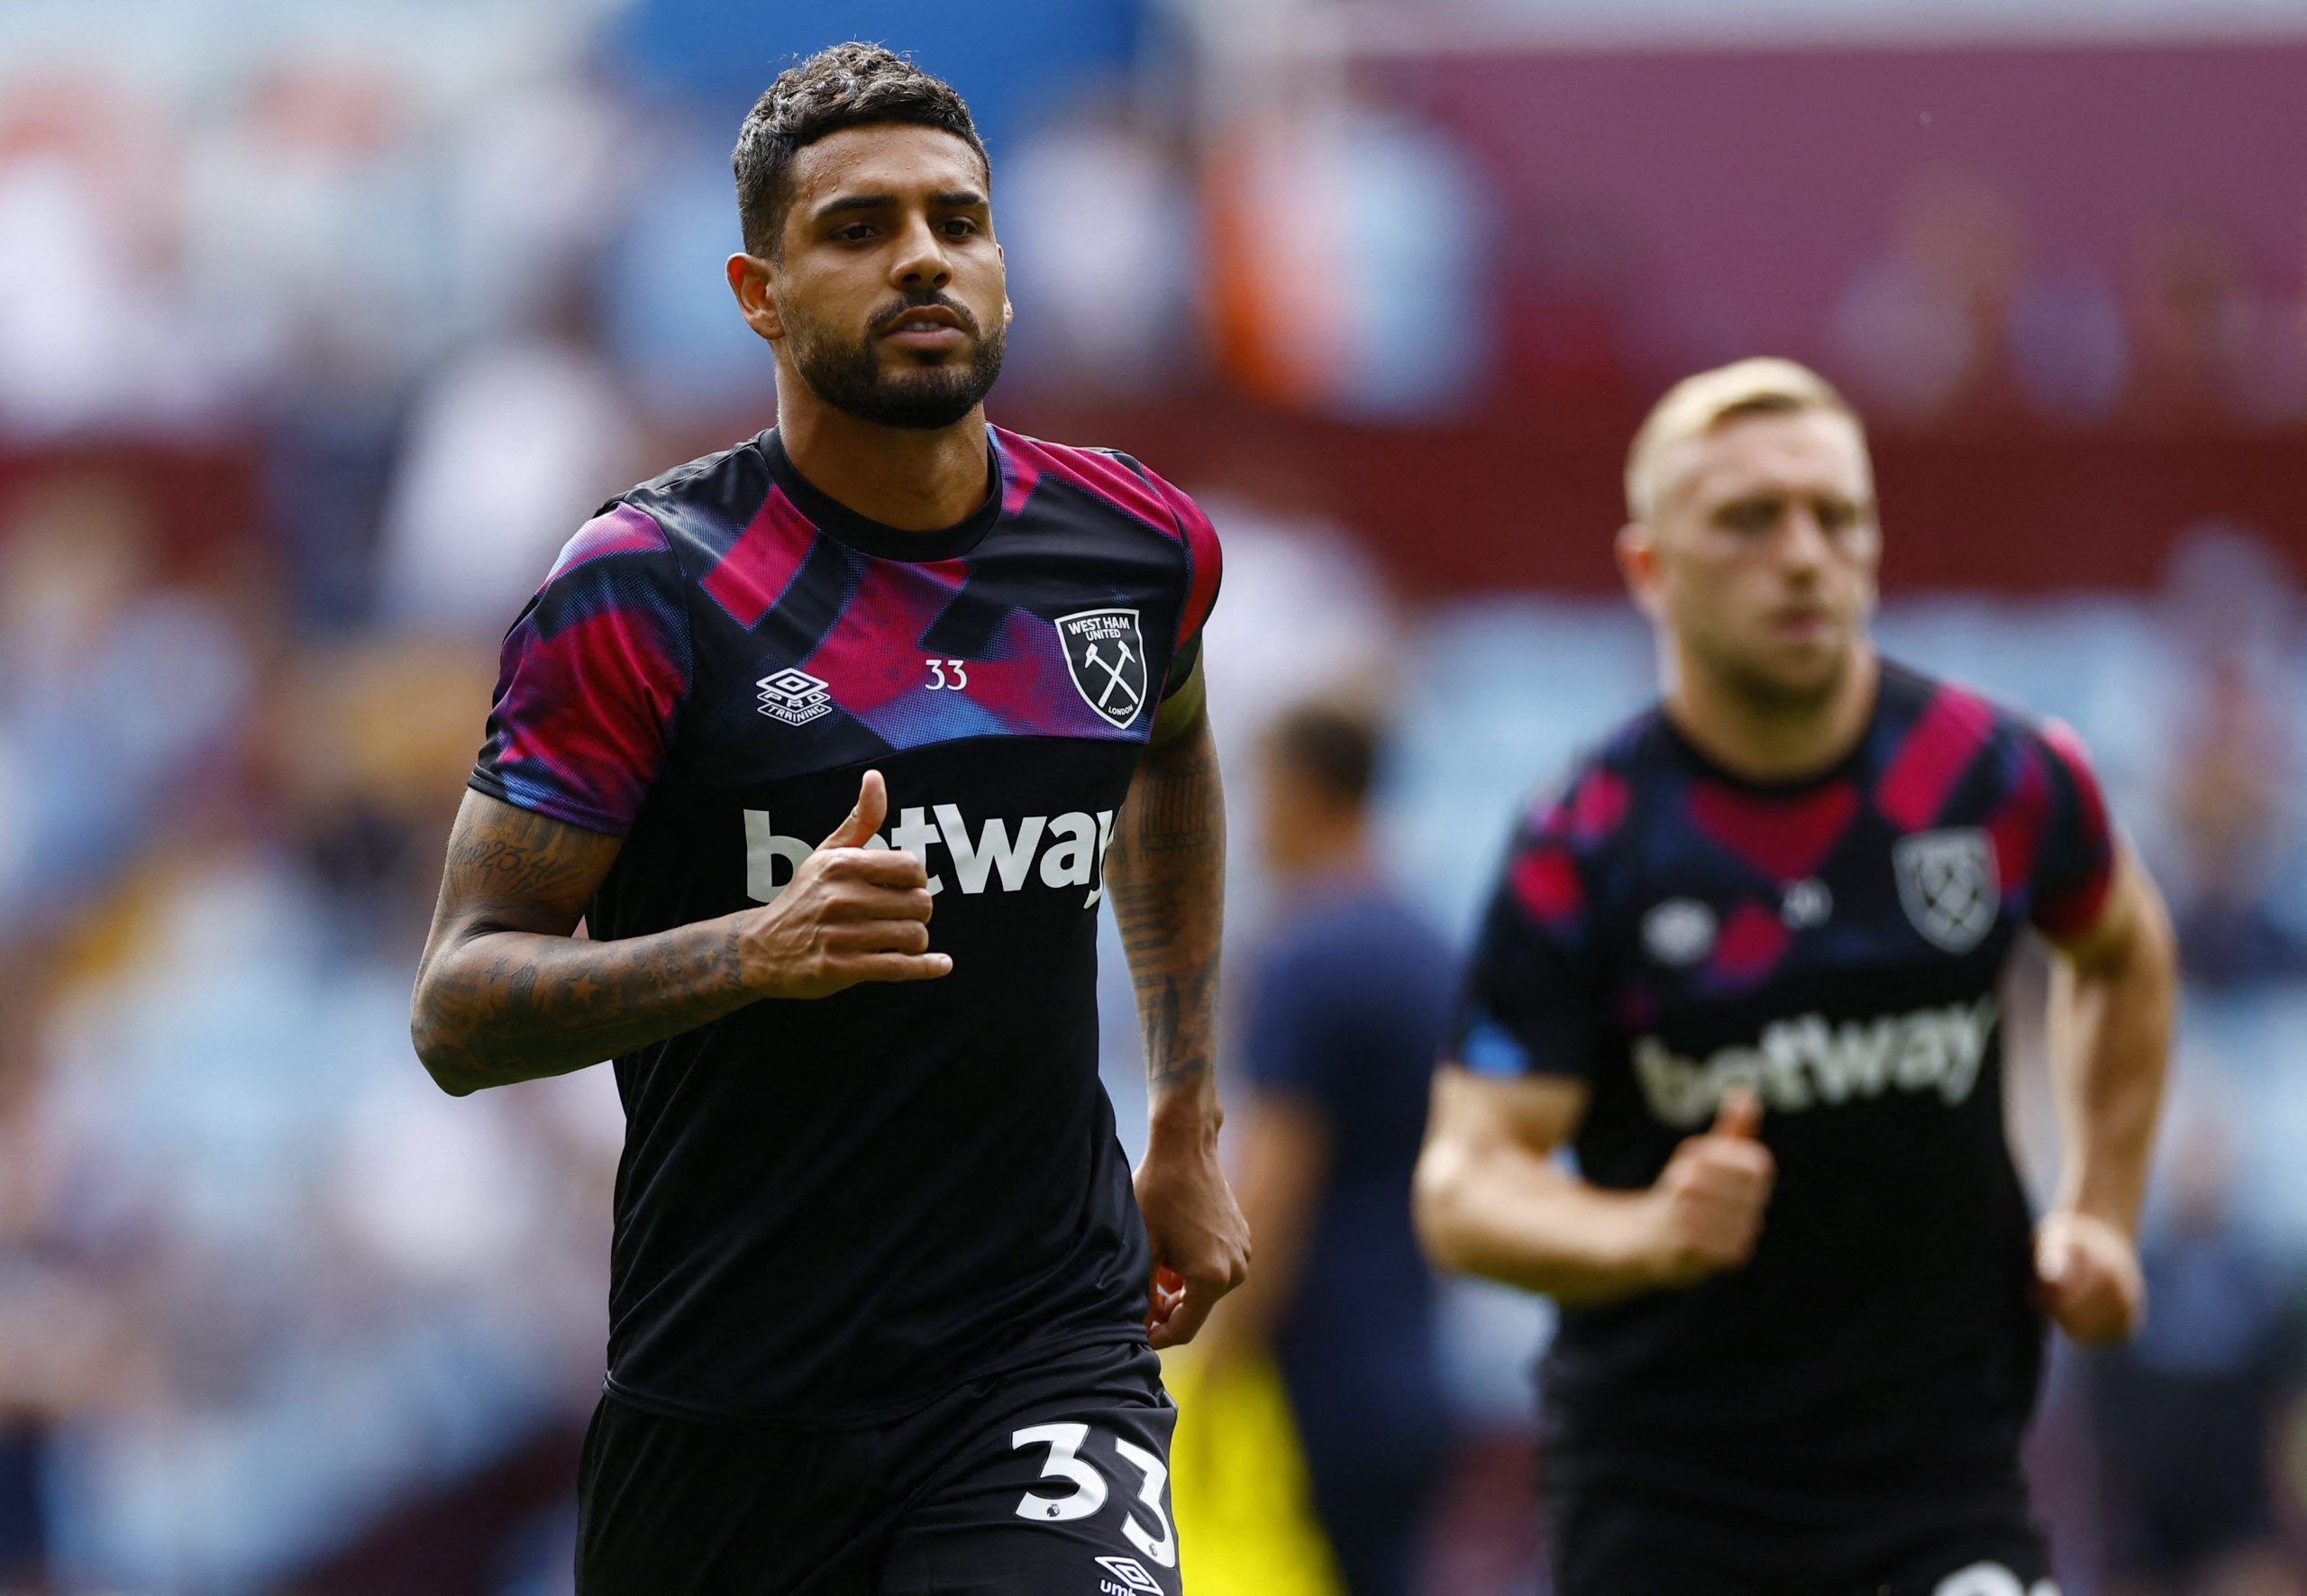 Soccer Football - Premier League - Aston Villa v West Ham United - Villa Park, Birmingham, Britain - August 28, 2022 West Ham United's Emerson during the warm up before the match Action Images via Reuters/Andrew Boyers EDITORIAL USE ONLY. No use with unauthorized audio, video, data, fixture lists, club/league logos or 'live' services. Online in-match use limited to 75 images, no video emulation. No use in betting, games or single club /league/player publications.  Please contact your account rep